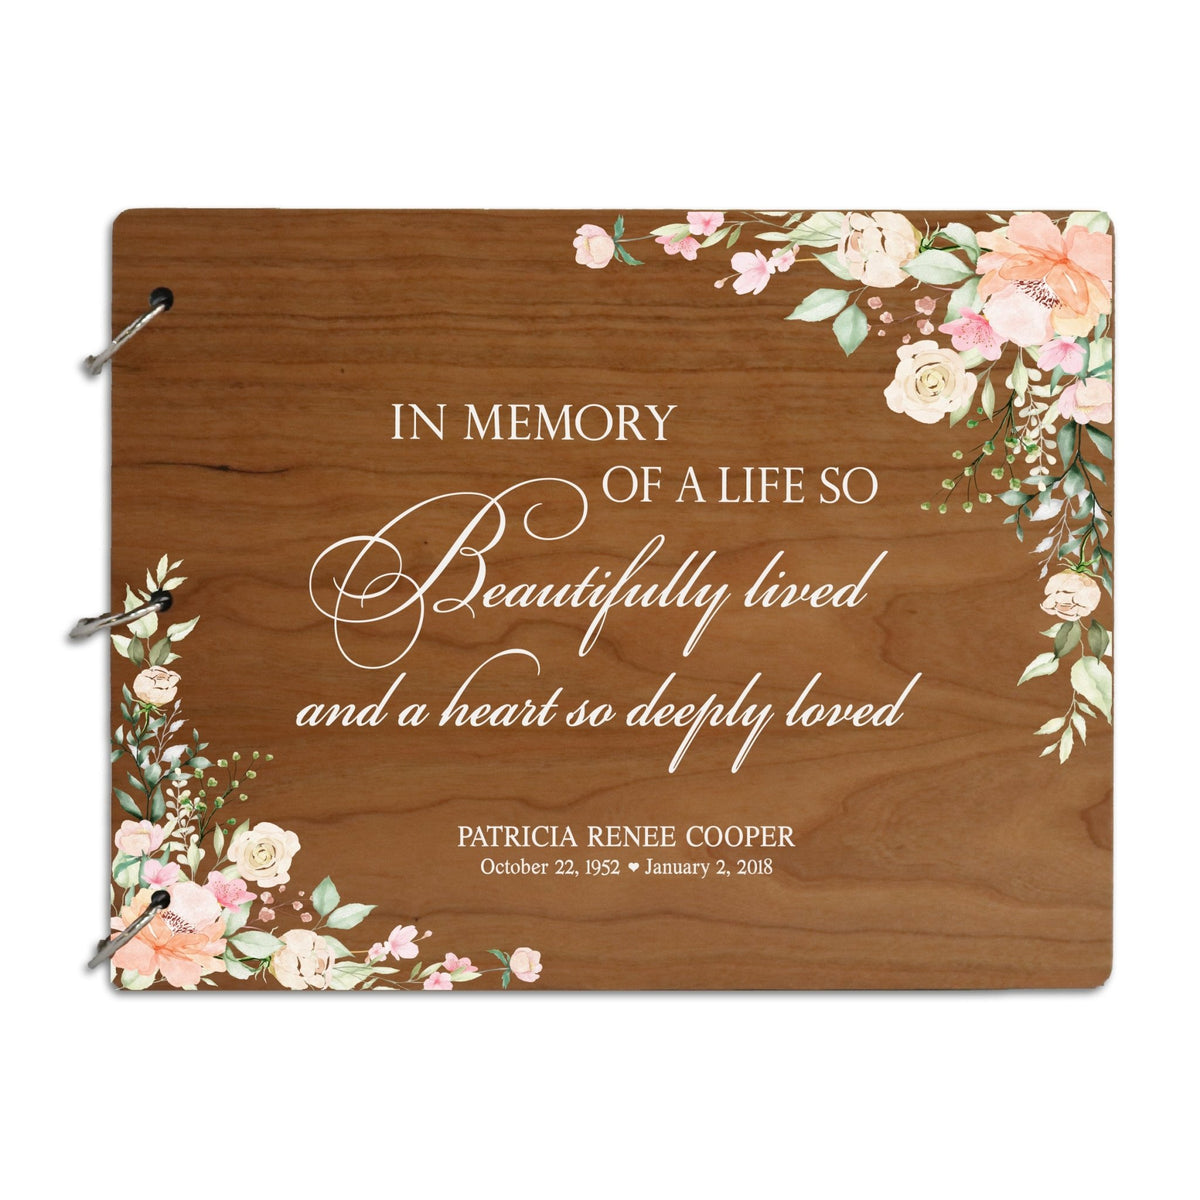 Personalized Funeral Service Guest Book 8.5x11 A Life Beautifully Lived - LifeSong Milestones